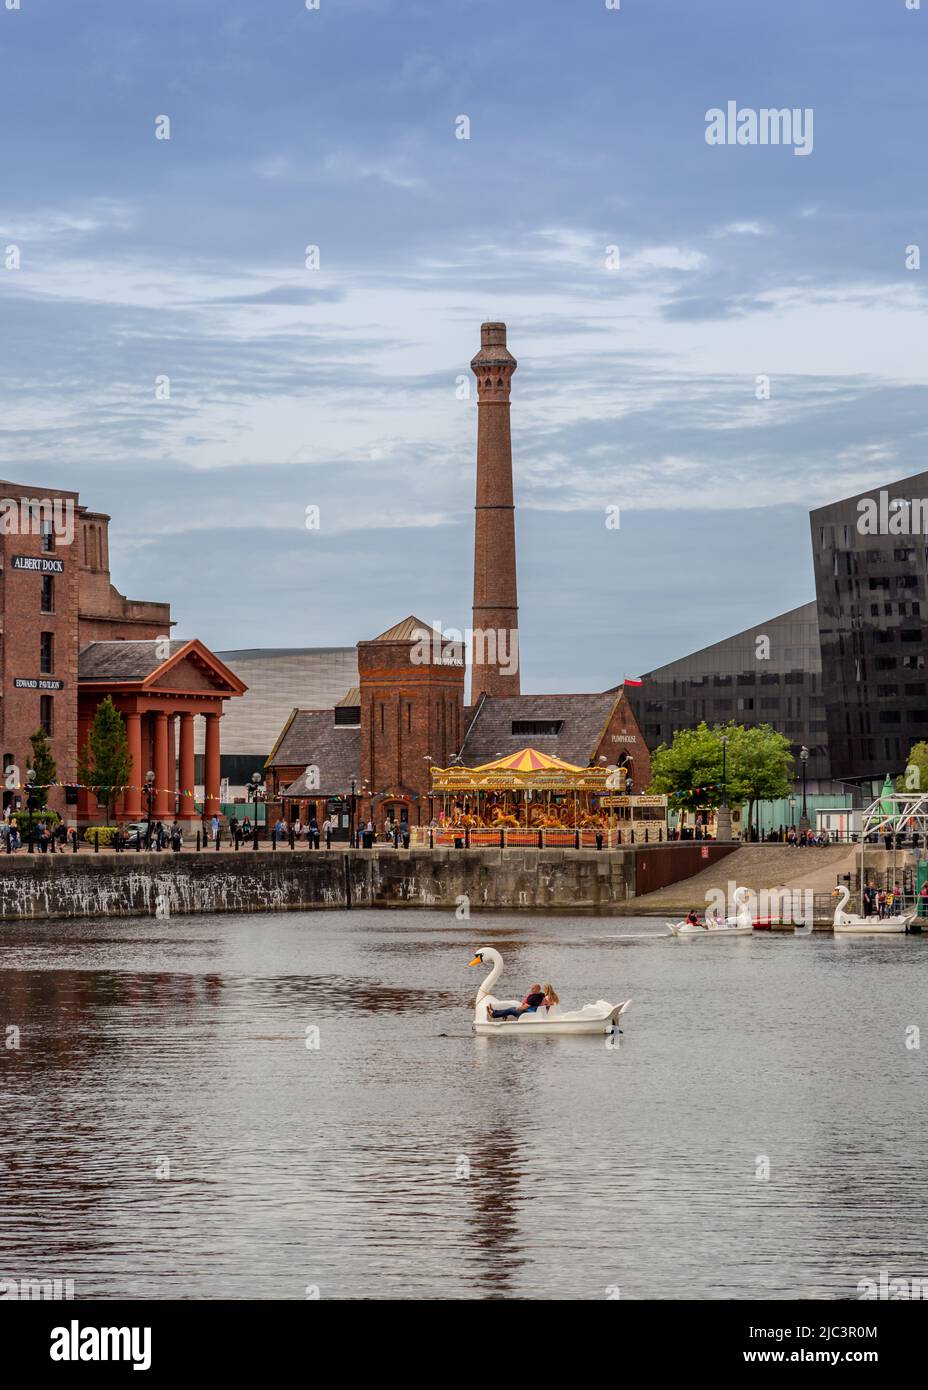 Liverpool docks with Pumphouse and tall ships view. Stock Photo